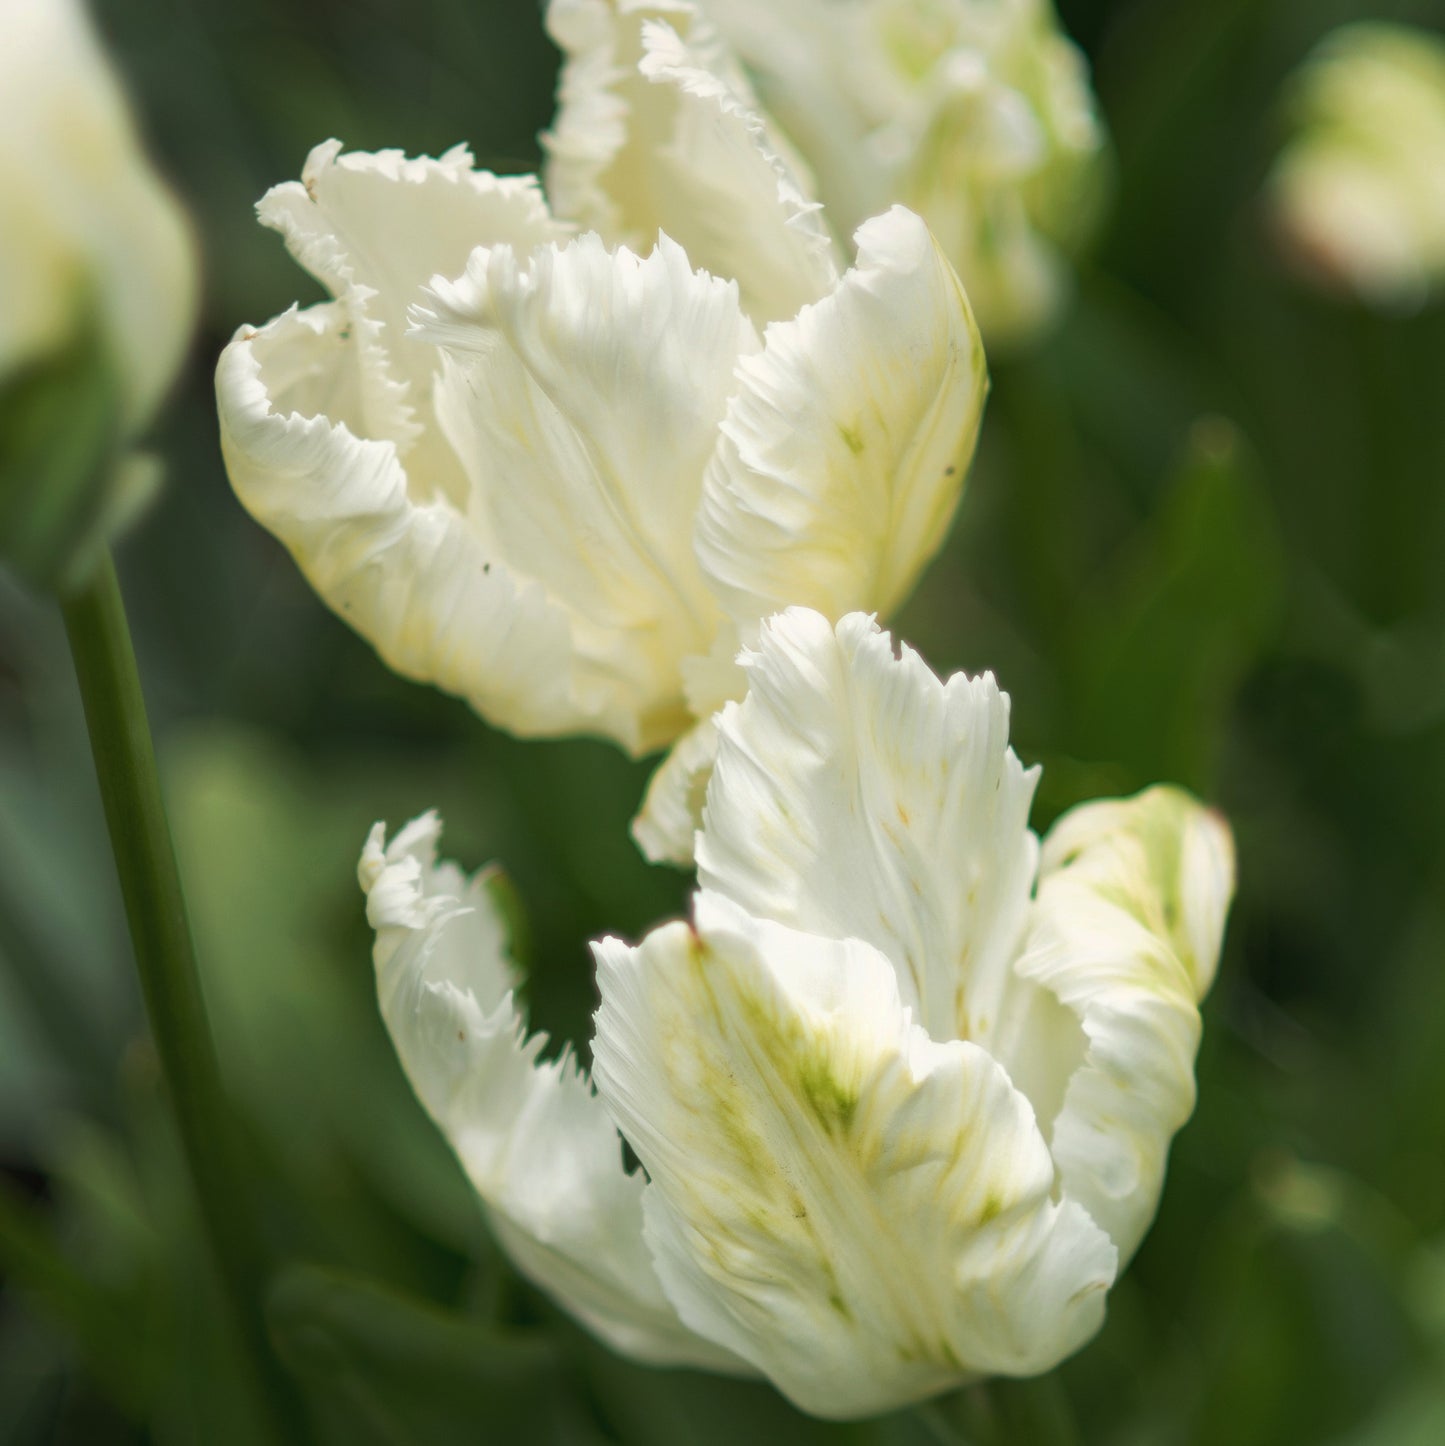 A Duo of White Parrot Tulips